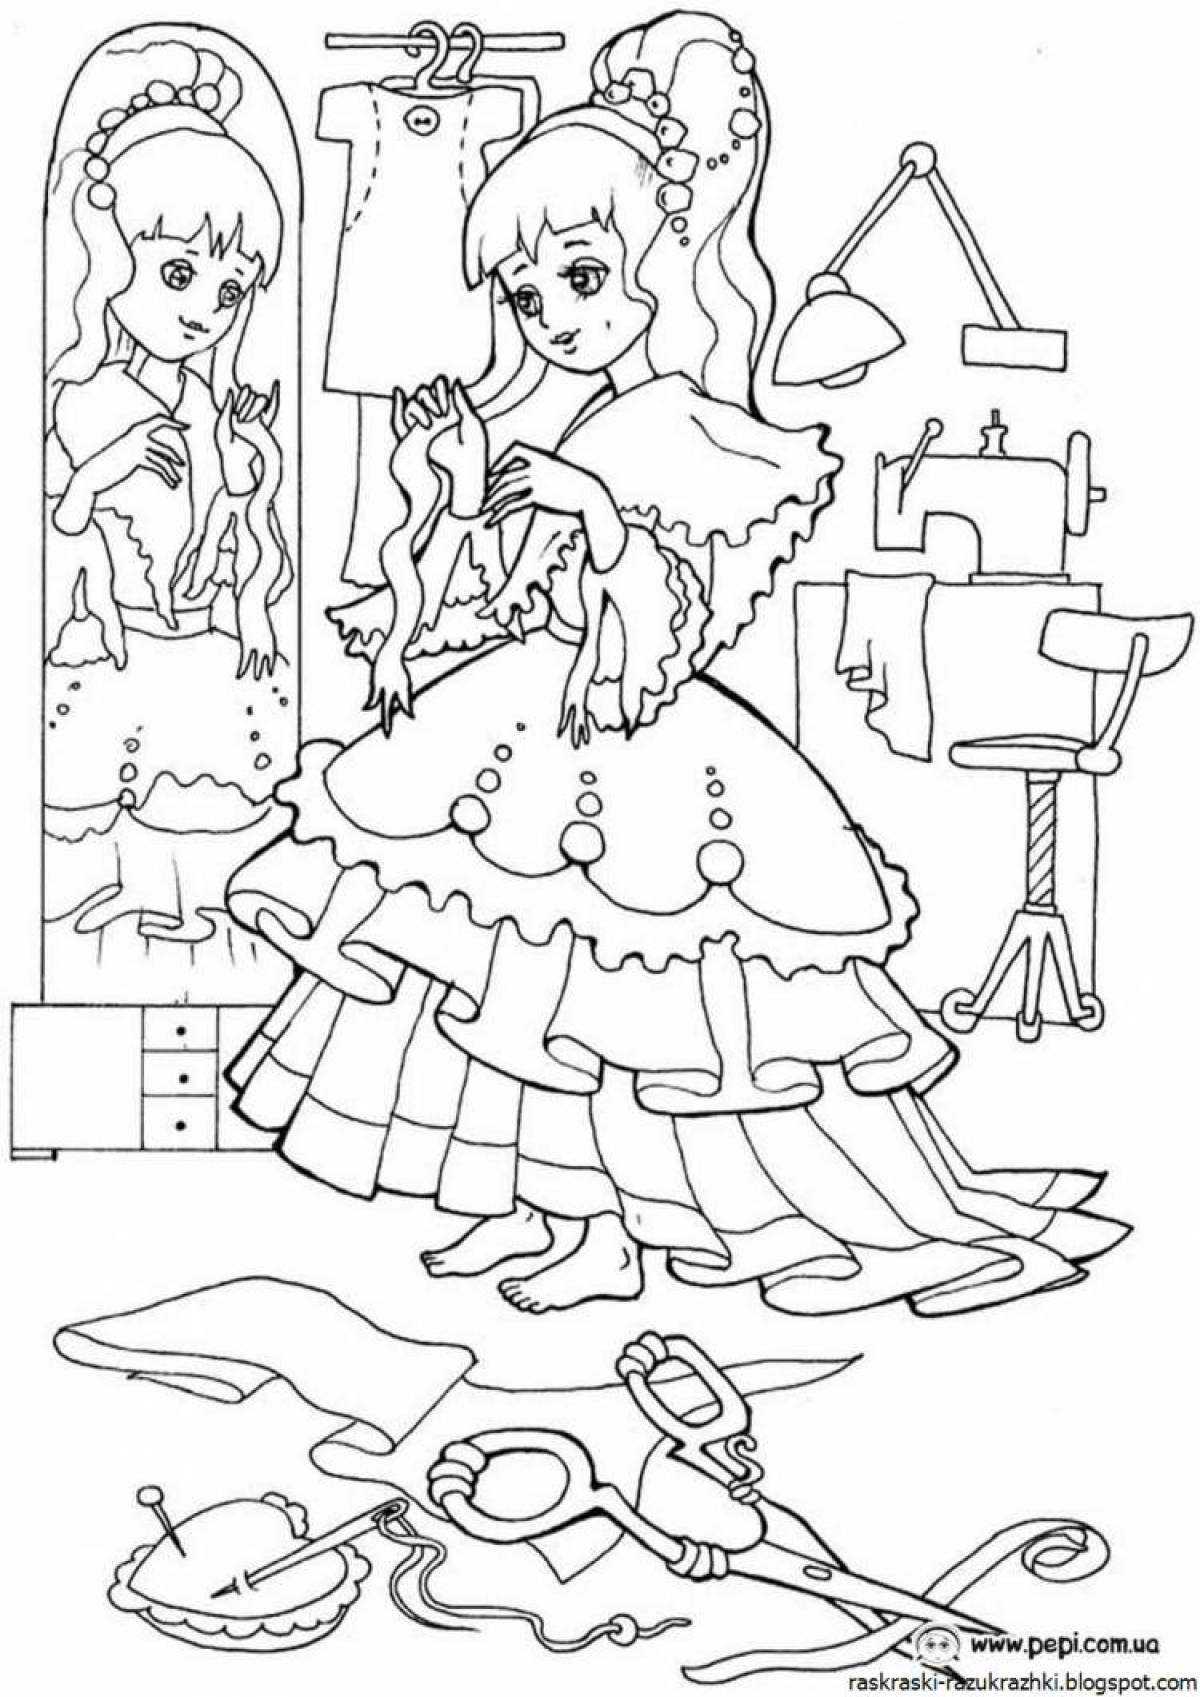 Crazy coloring book for girls 7-8 years old